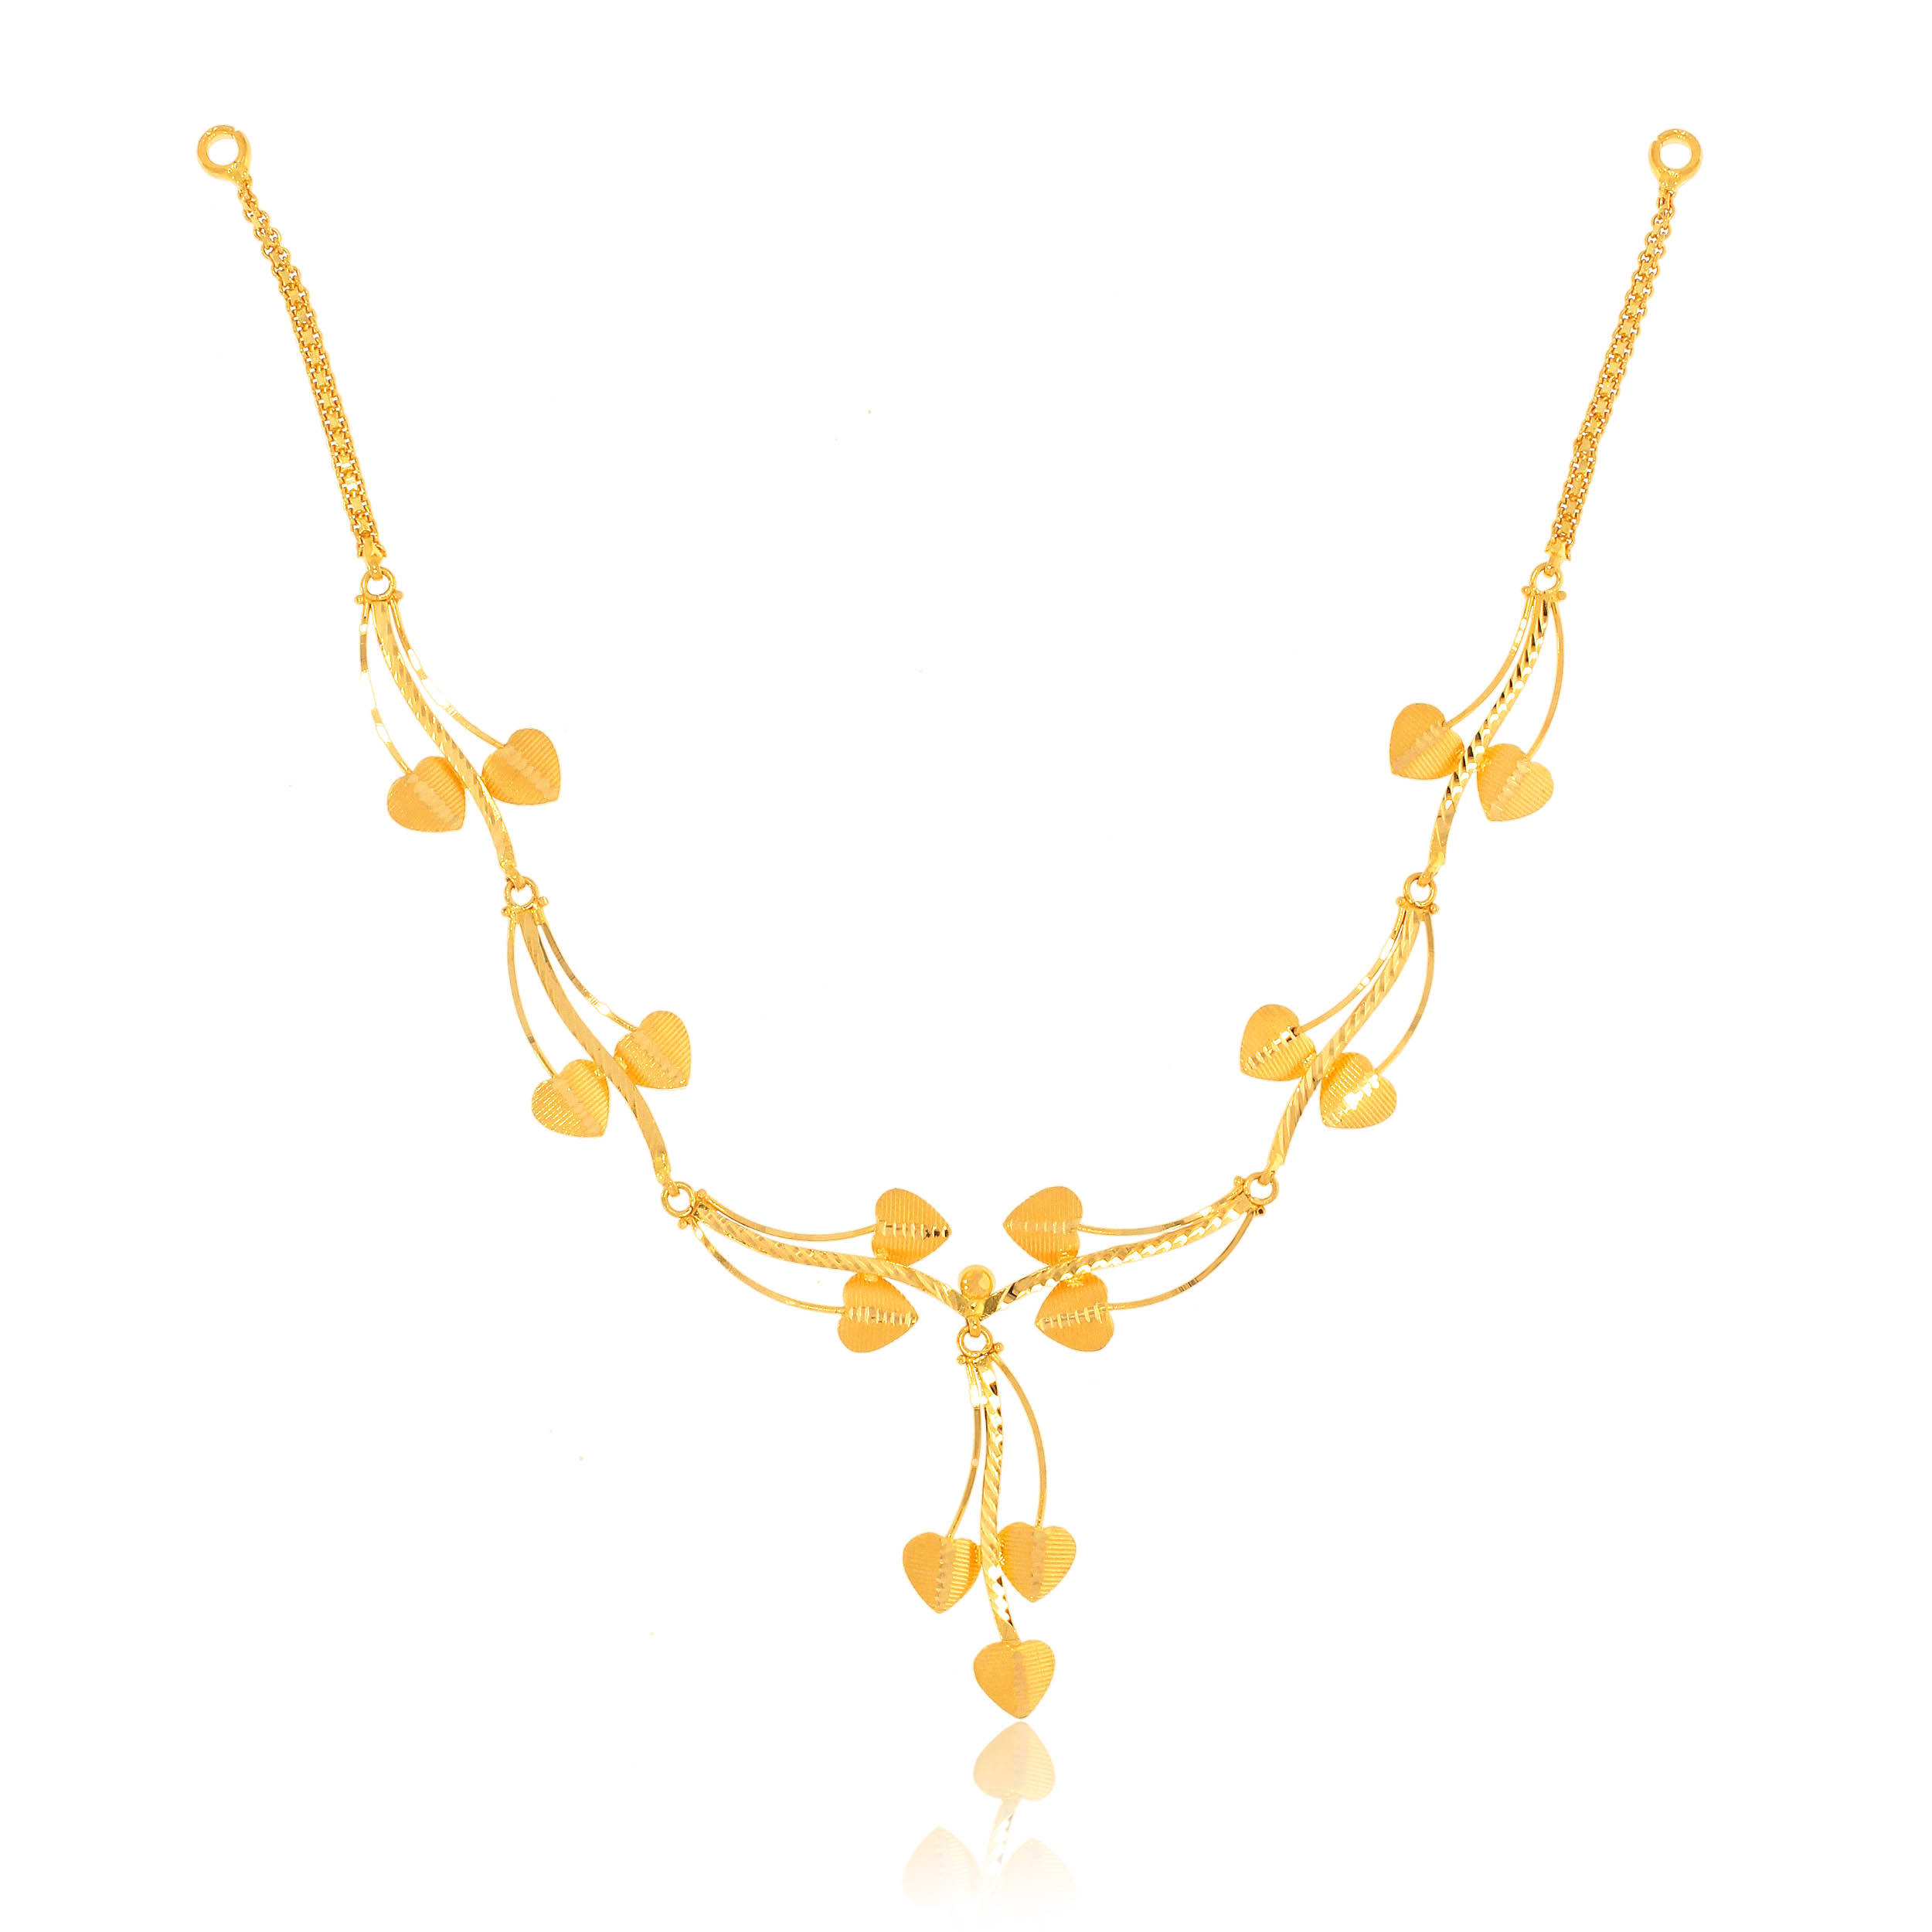 NIA  AABI JEWELS 22CT  BIS HALLMARK  GOLD NECKLACE FOR  WOMEN